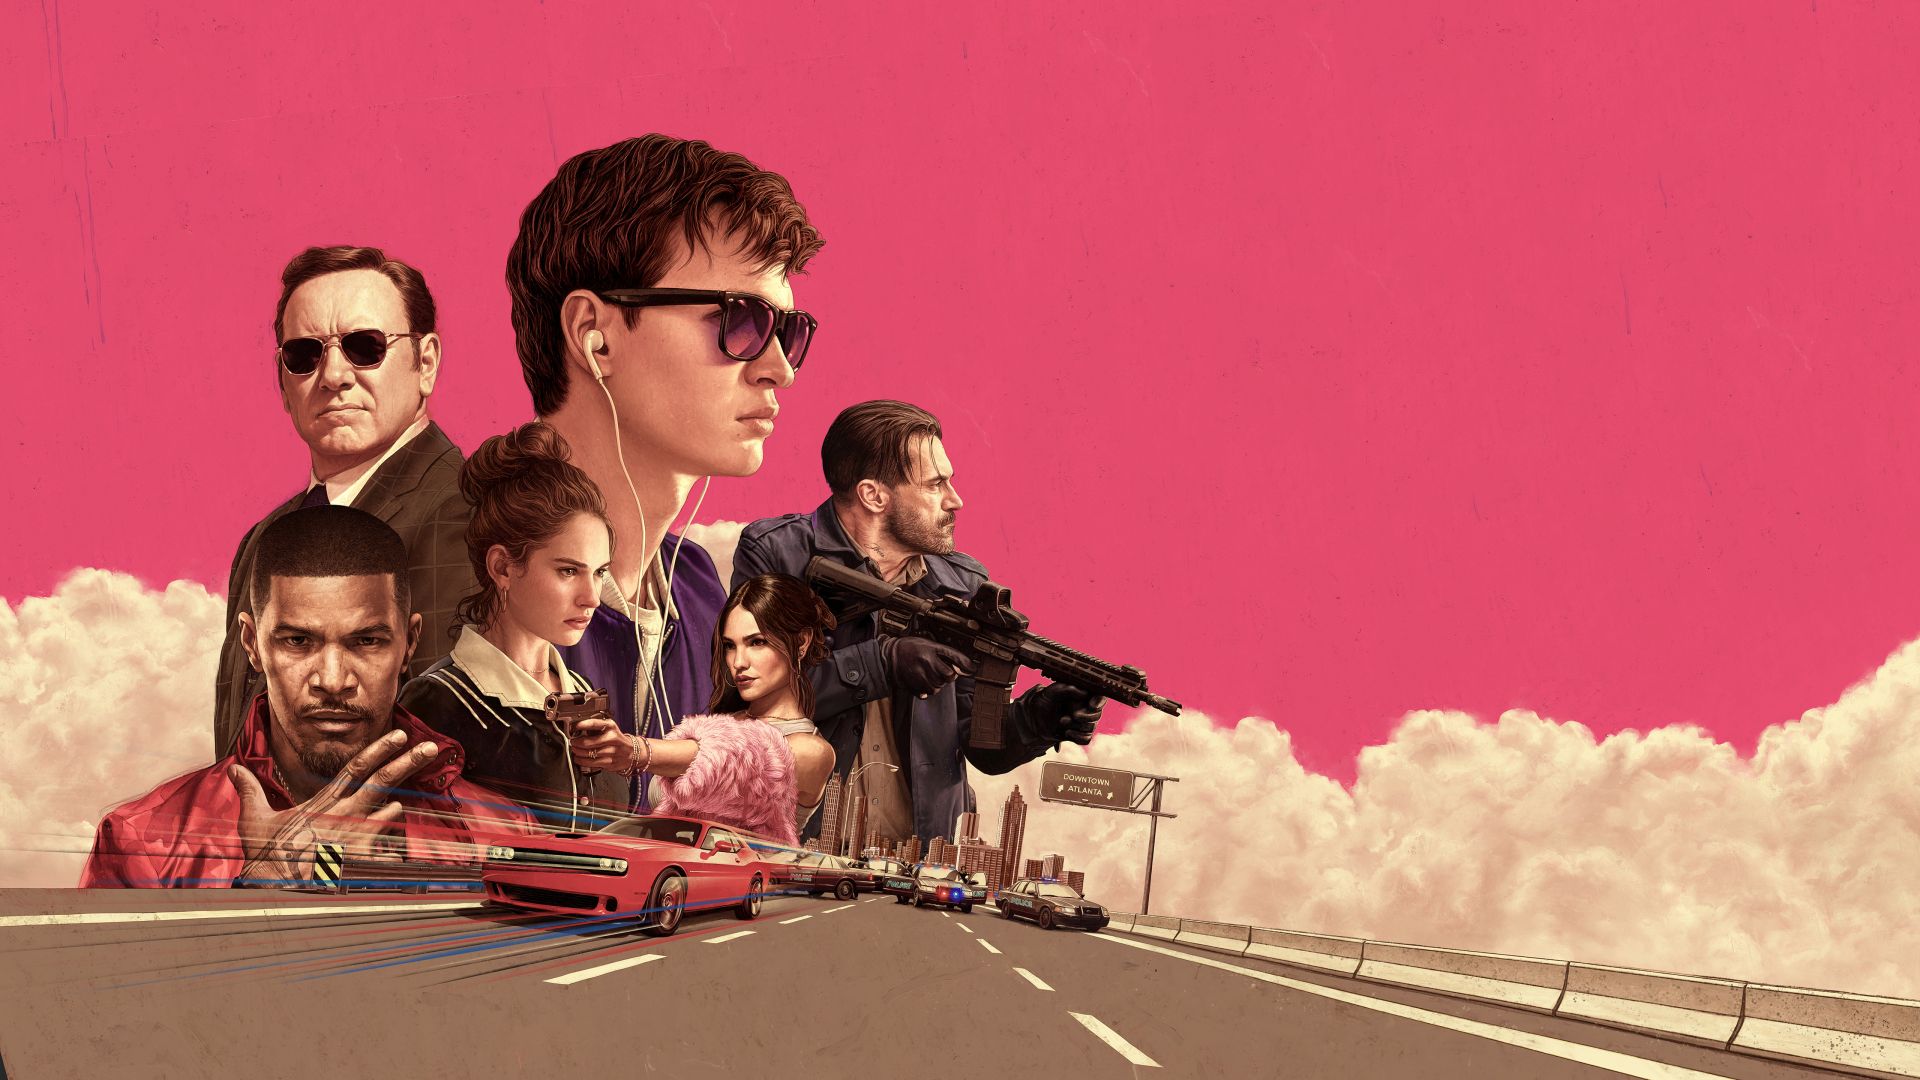 Wallpaper Baby Driver, movie, poster, cars' chase, fan art, poster